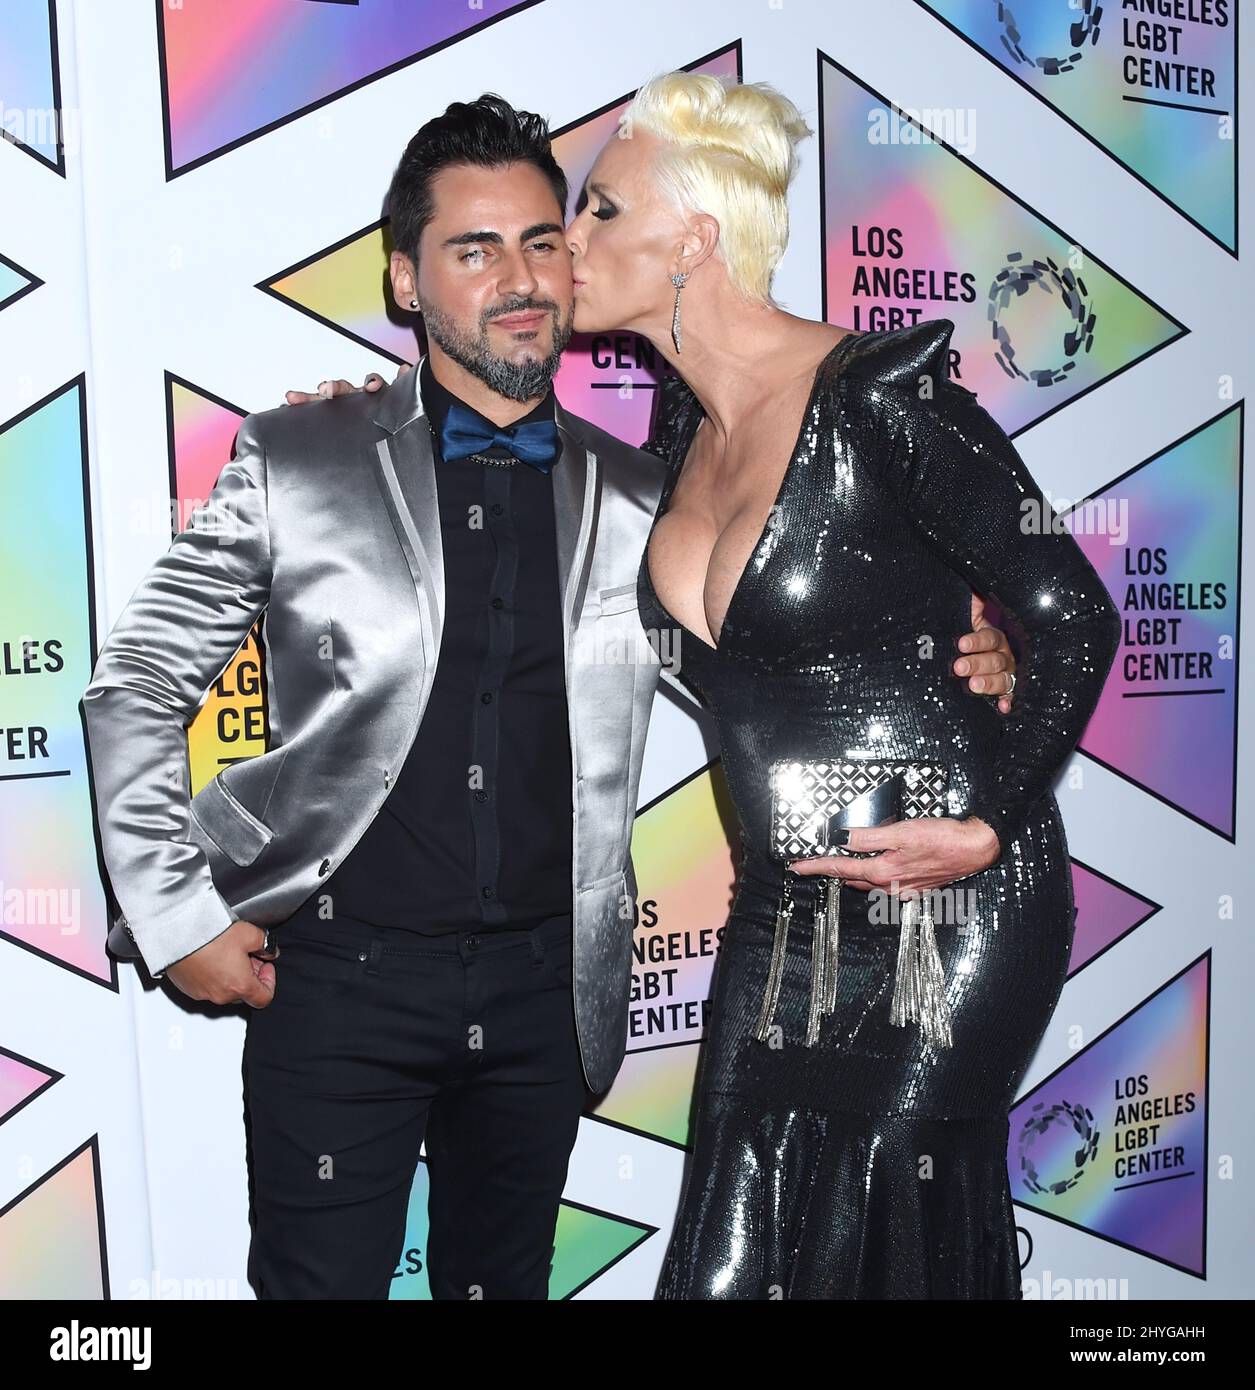 Brigitte Nielsen and Mattia Dess¬ attending the Los Angeles LGBT Center's 49th Anniversary Gala Vanguard Awards held at the Beverly Hilton Hotel in Los Angeles, California Stock Photo